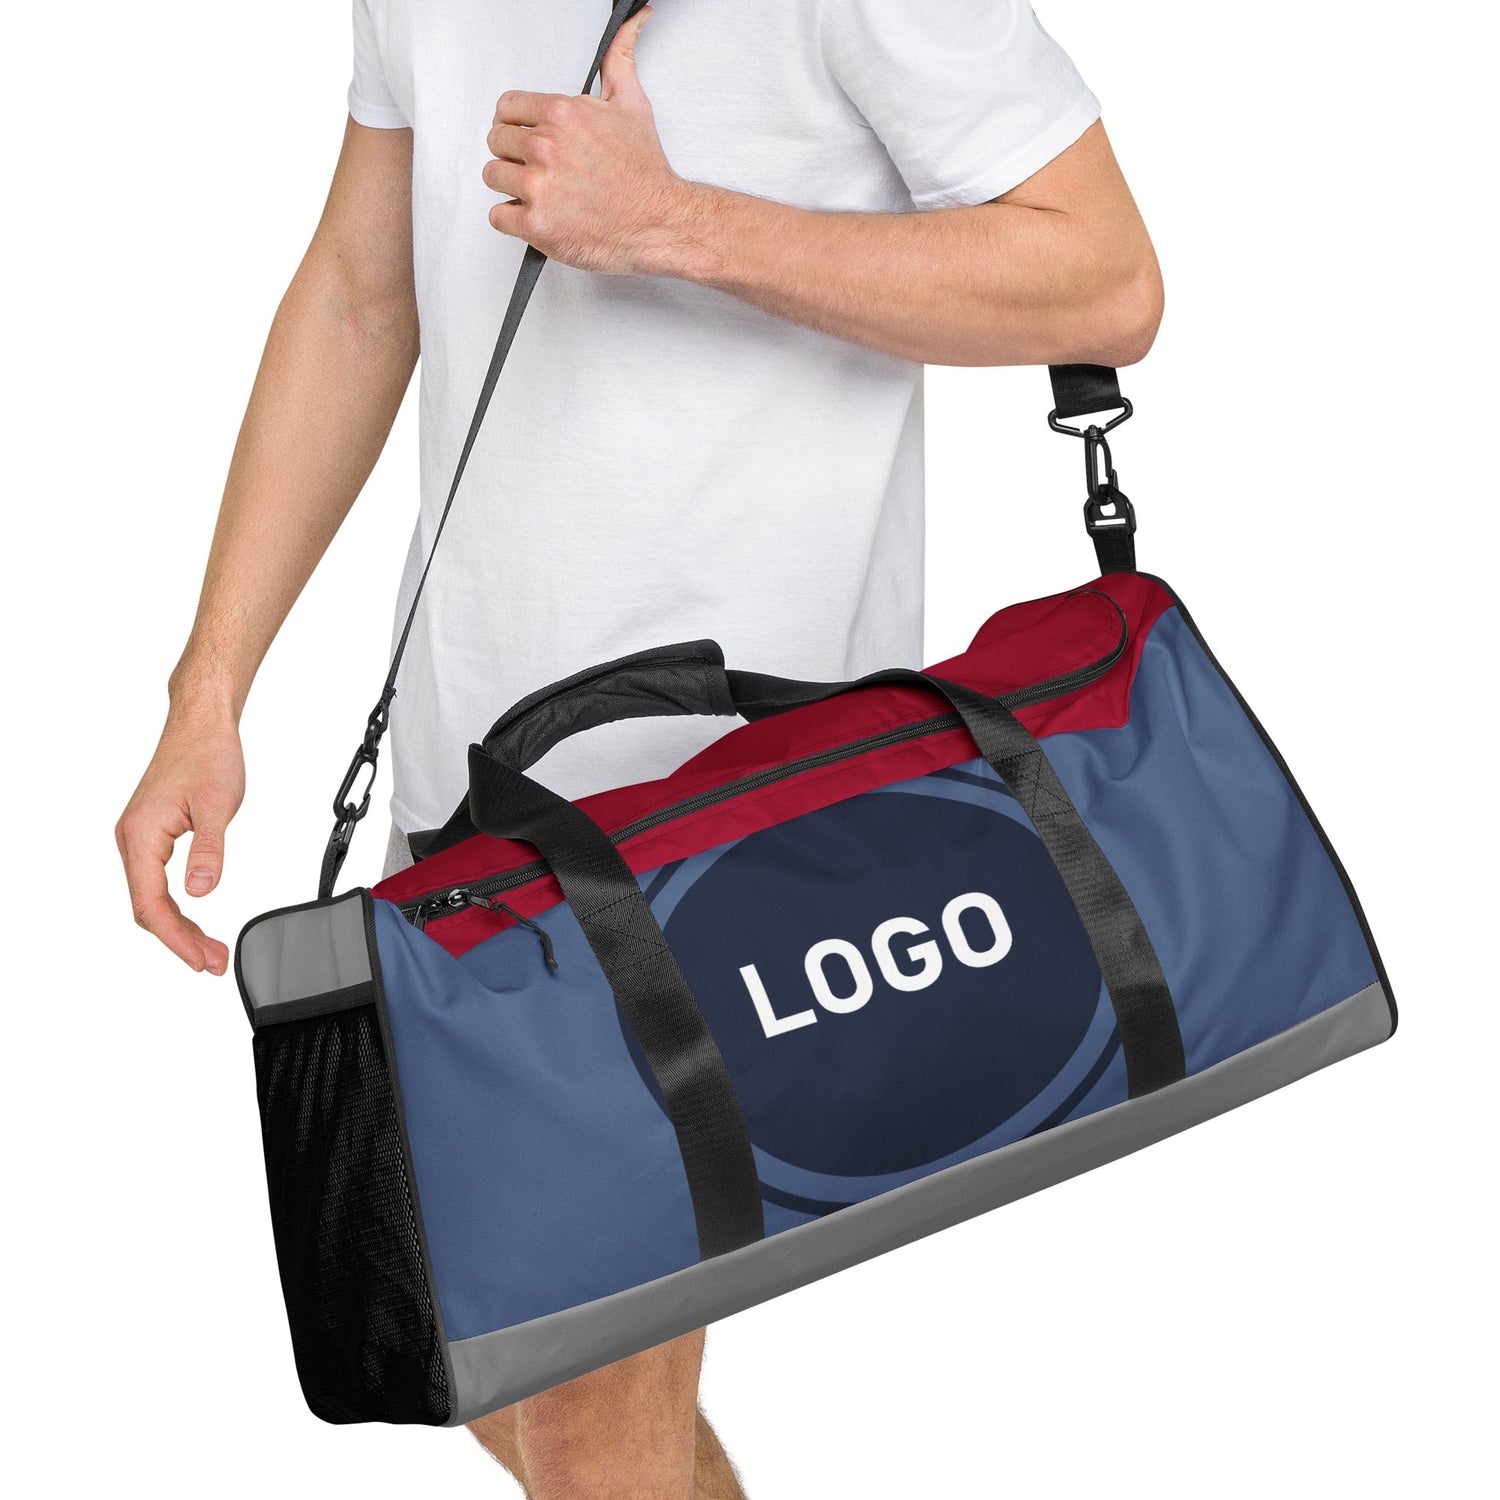 TIME OF VIBES TOV Reisetasche CORPORATE Demo - €159,00